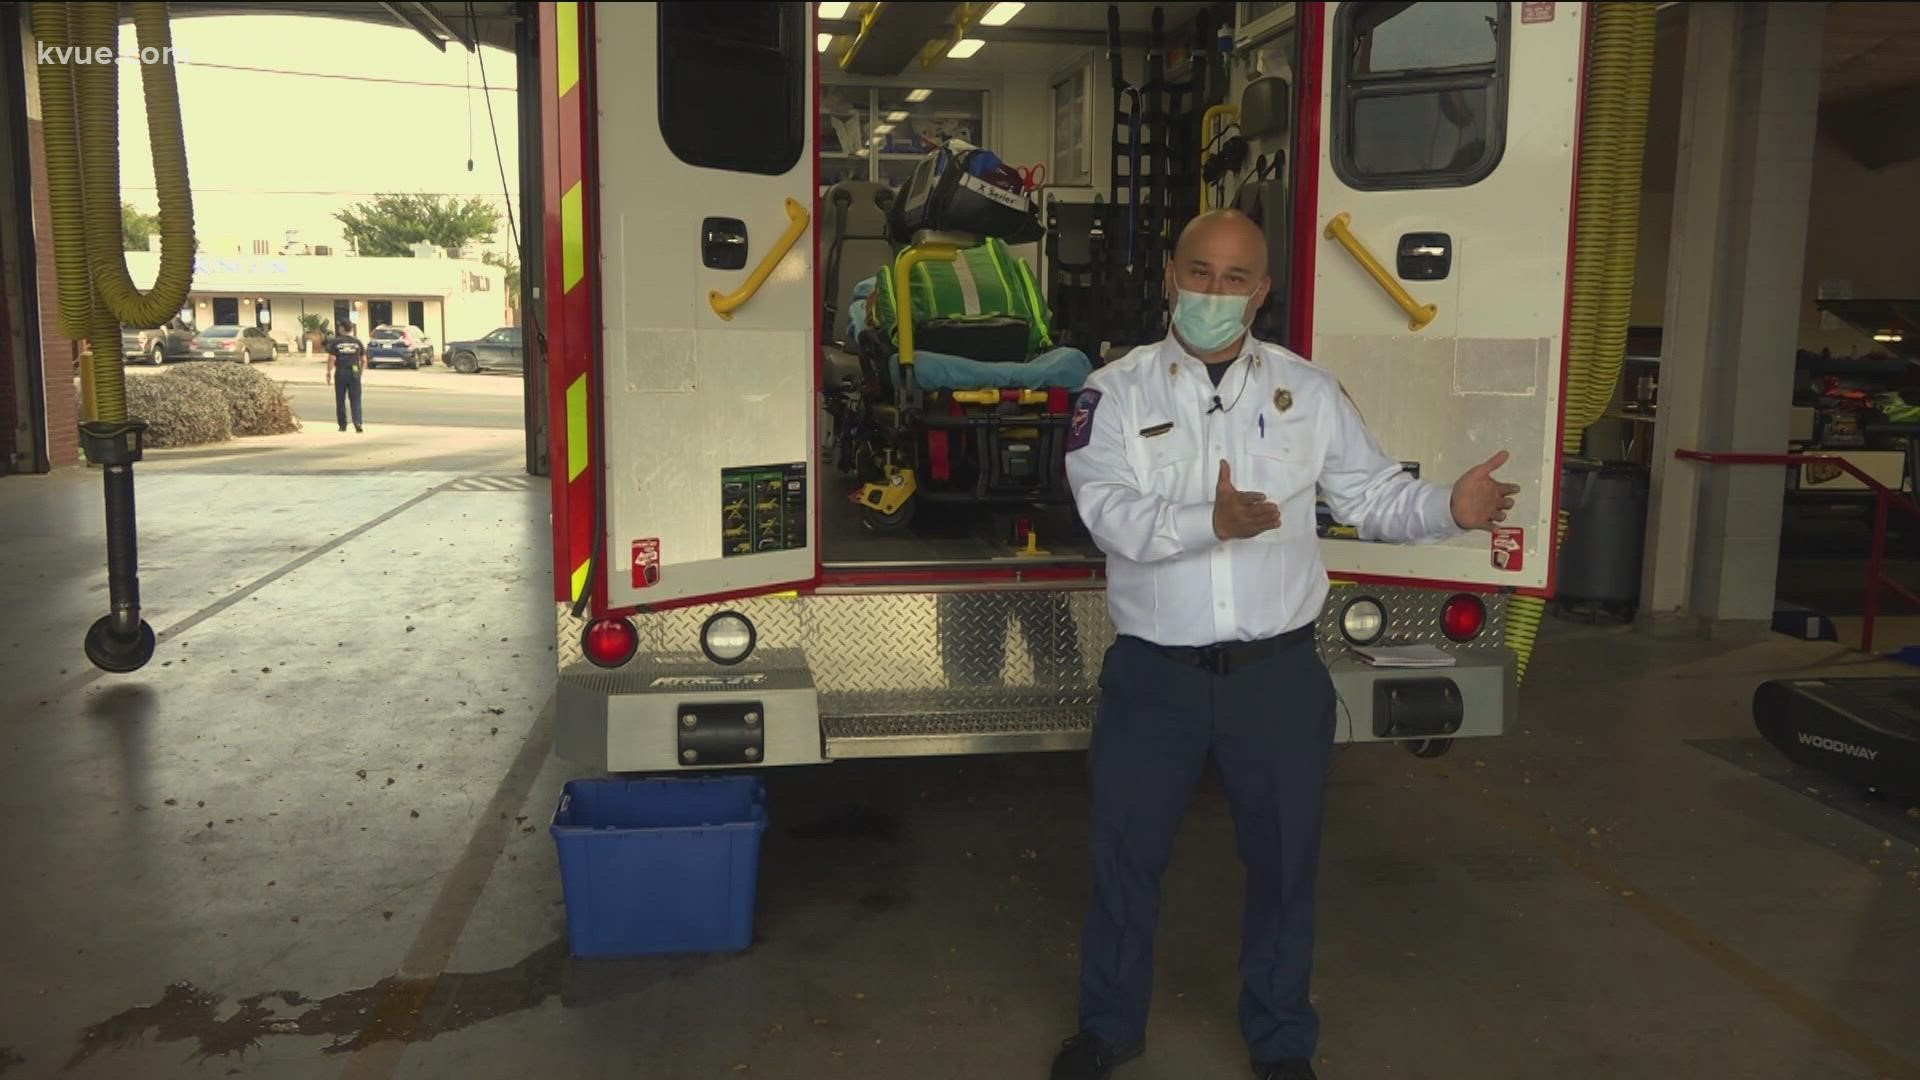 A surge in COVID-19 cases is putting a strain on first responders. Here's how the Pflugerville Fire Department is handling the situation.